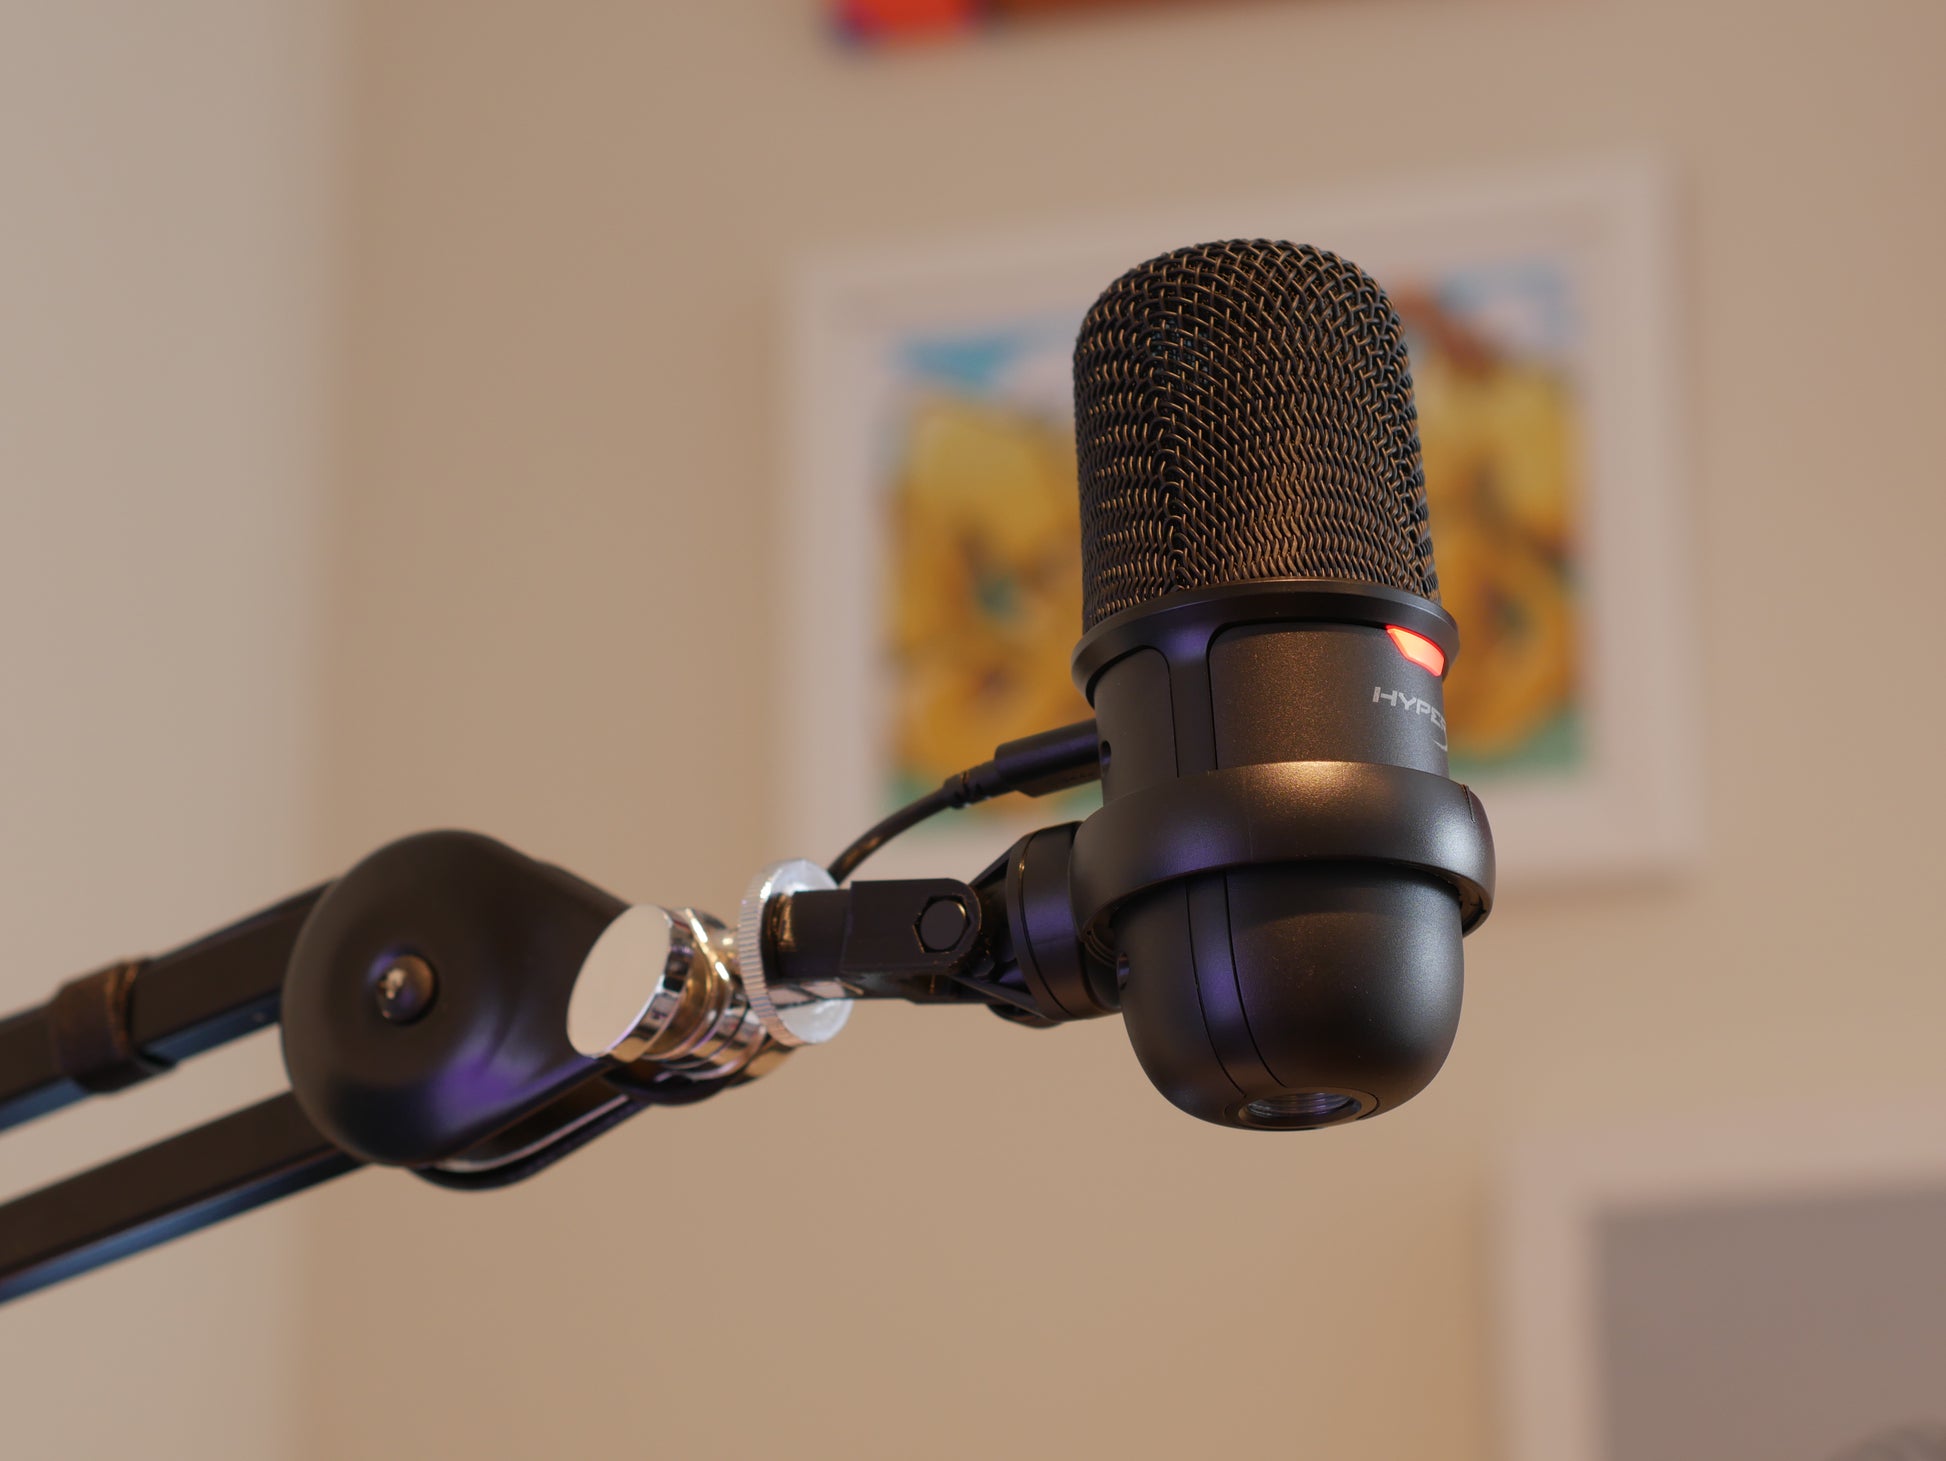 A black HyperX SoloCast microphone mount adapter attached to a boom arm and holding the HyperX SoloCast microphone.